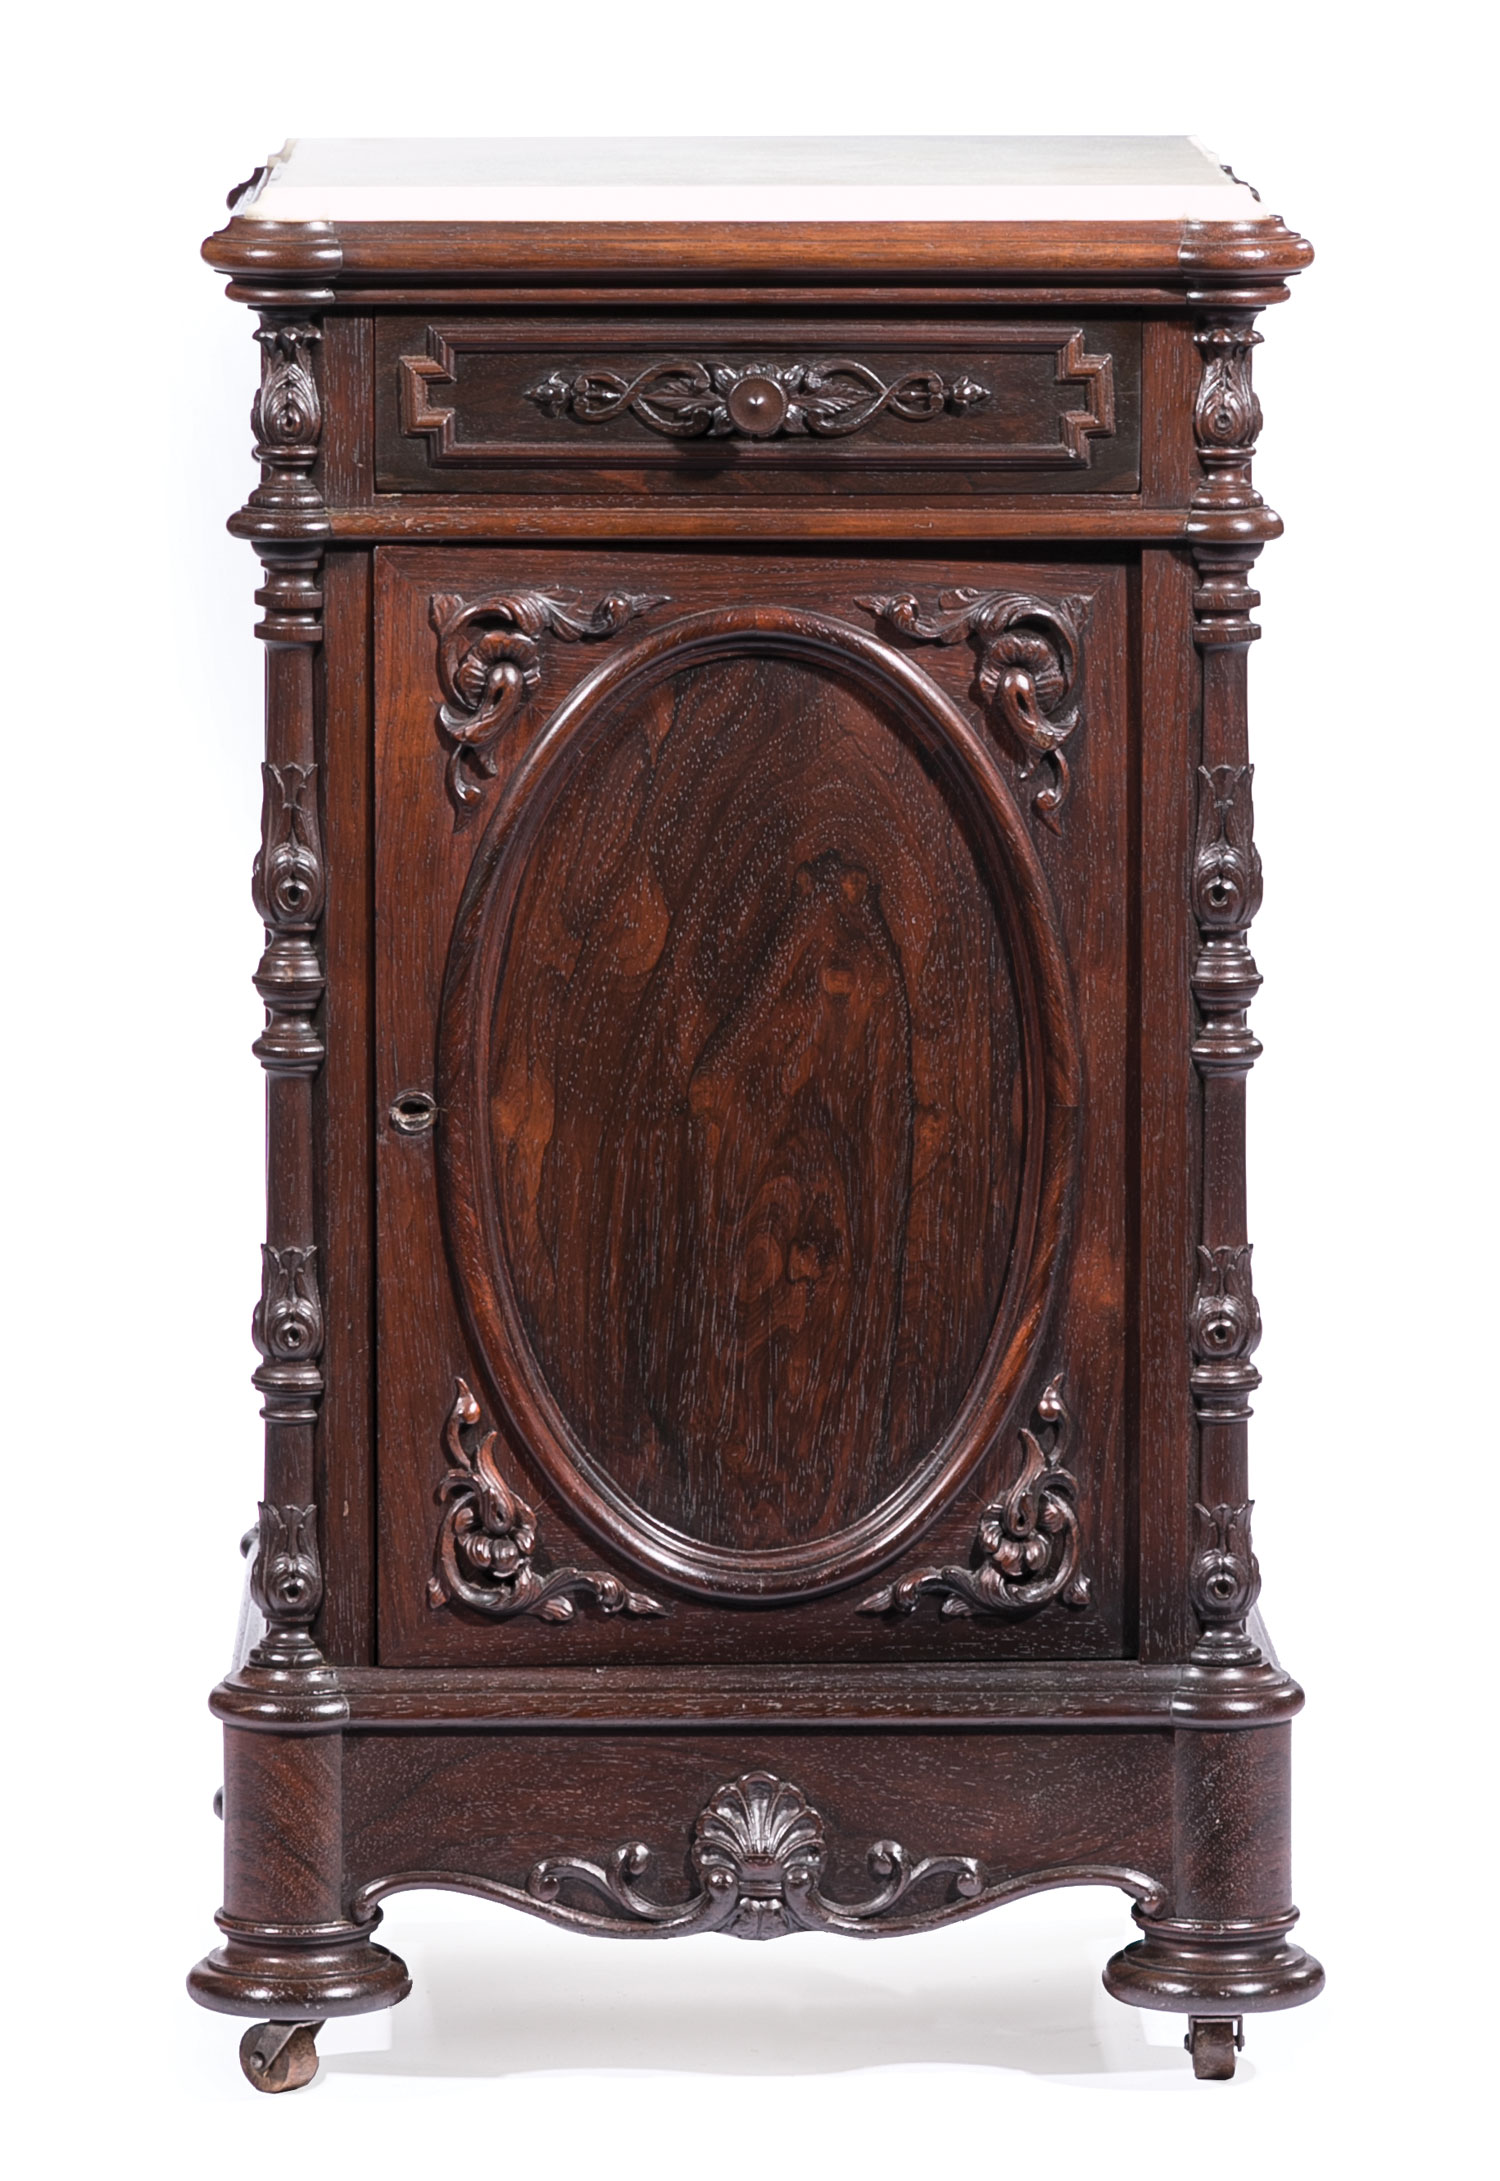 Very Fine American Carved Rosewood Bedroom Suite , mid-19th c., labeled A. (Alexander) Roux, incl. - Image 15 of 20